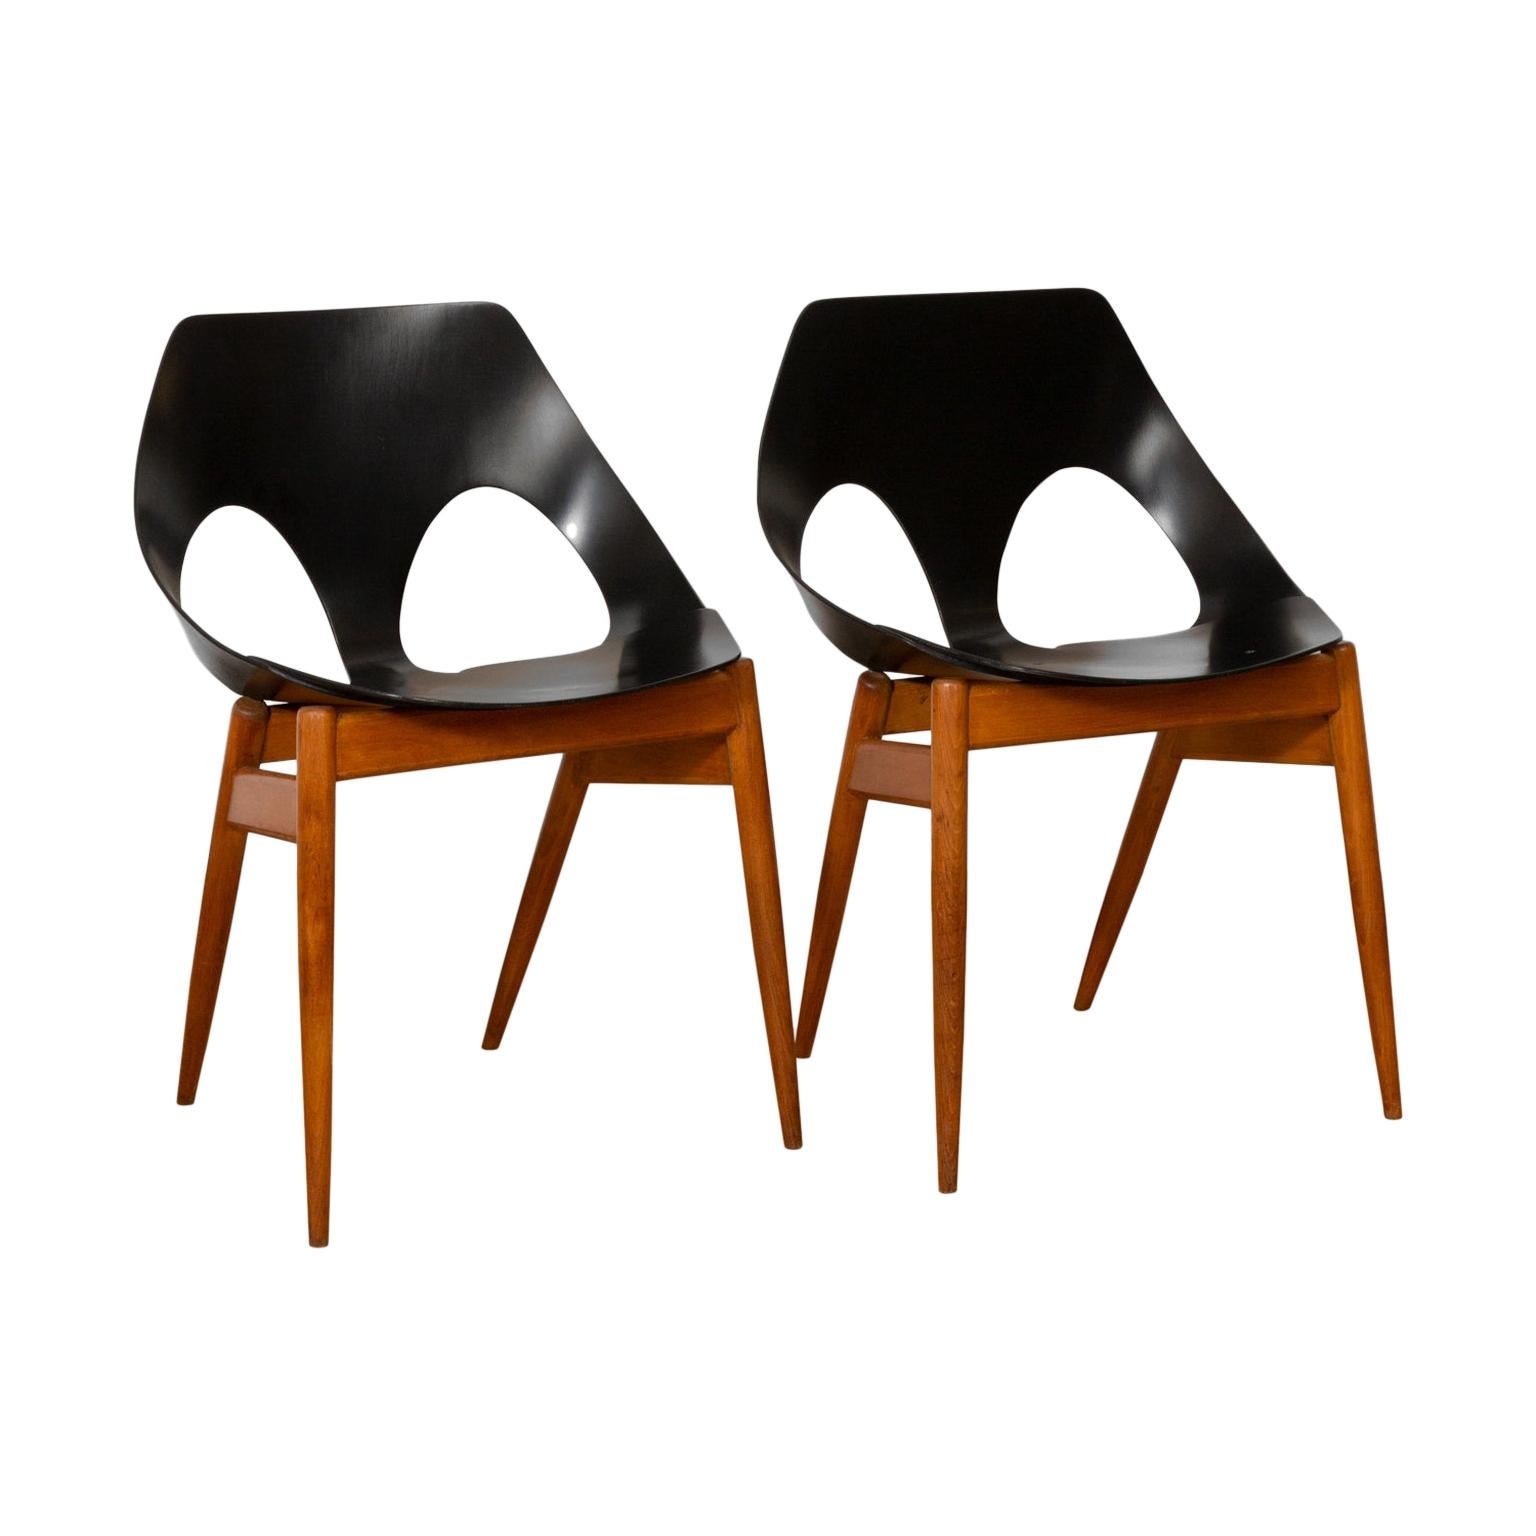 Pair of 'C2' Chairs By Carl Jacobs for Kandya 1950s For Sale